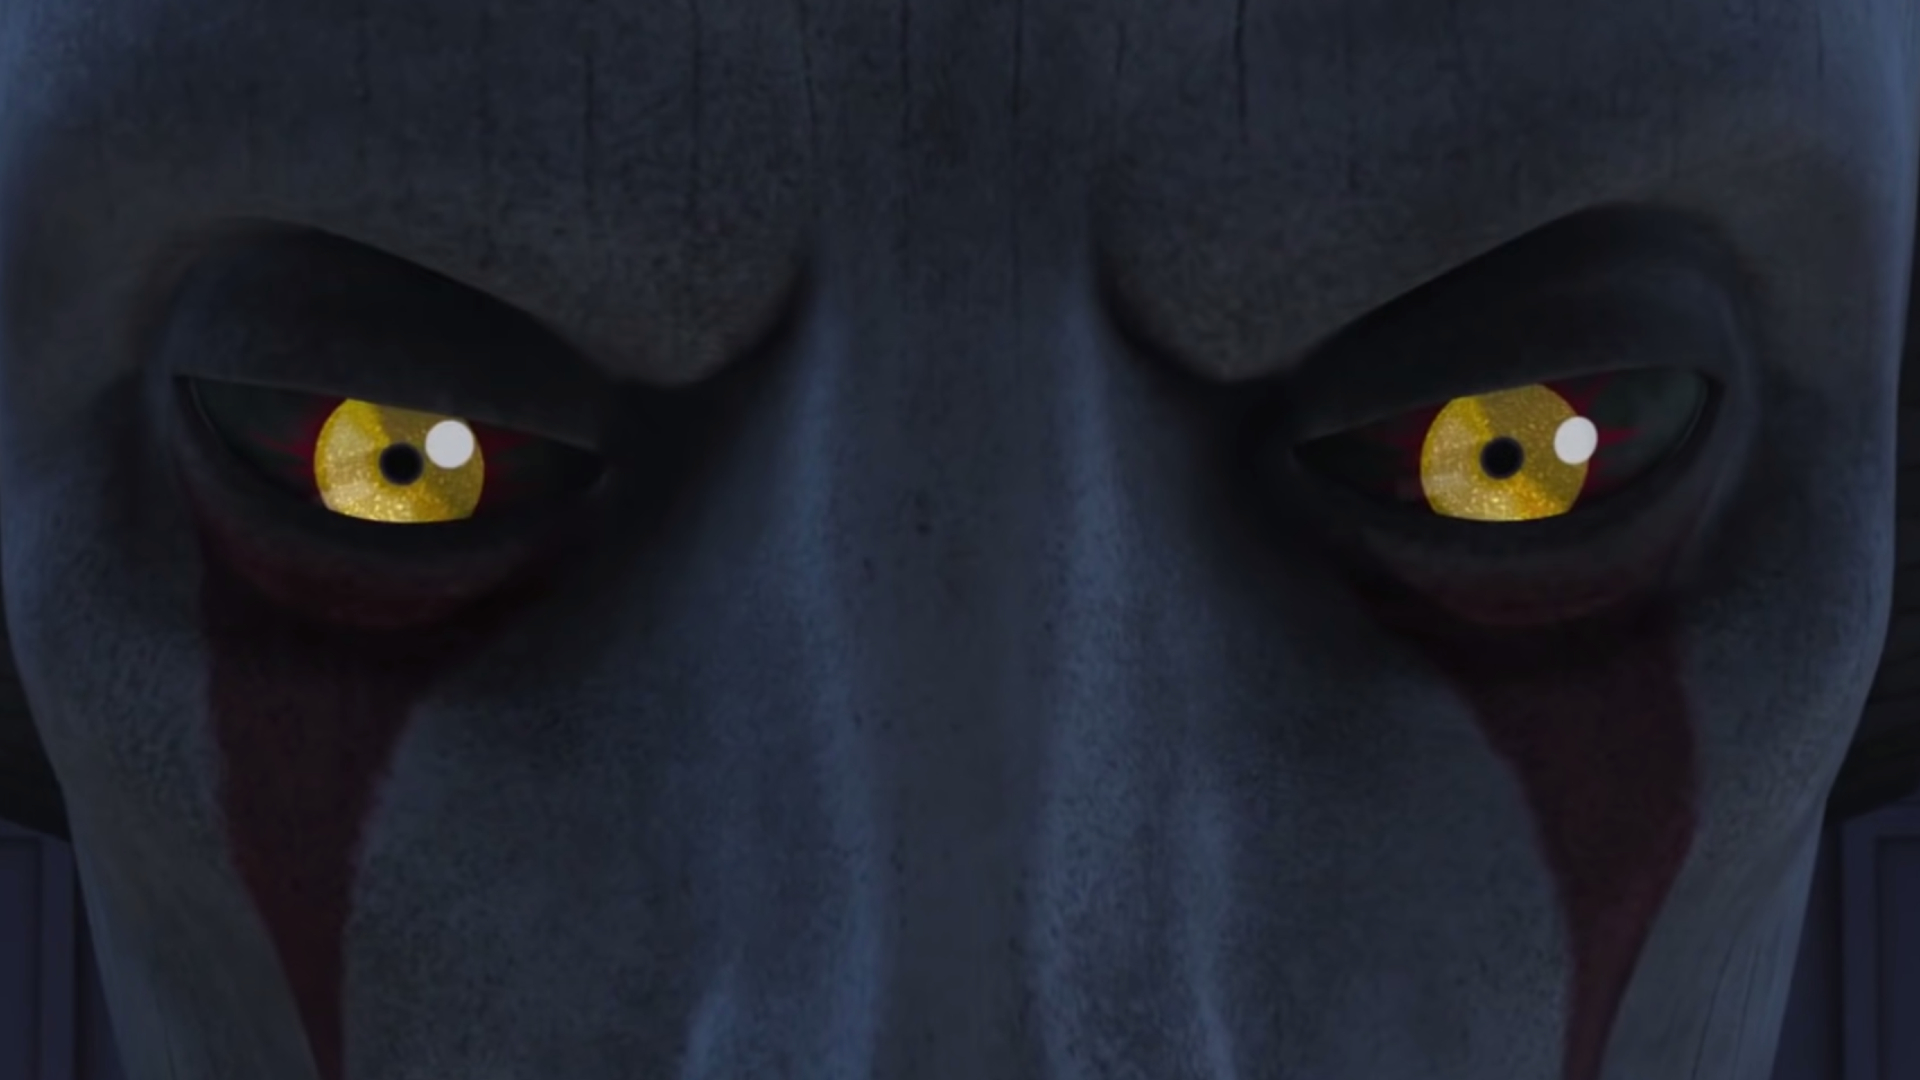 The Grand Inquisitor - Star Wars Rebels